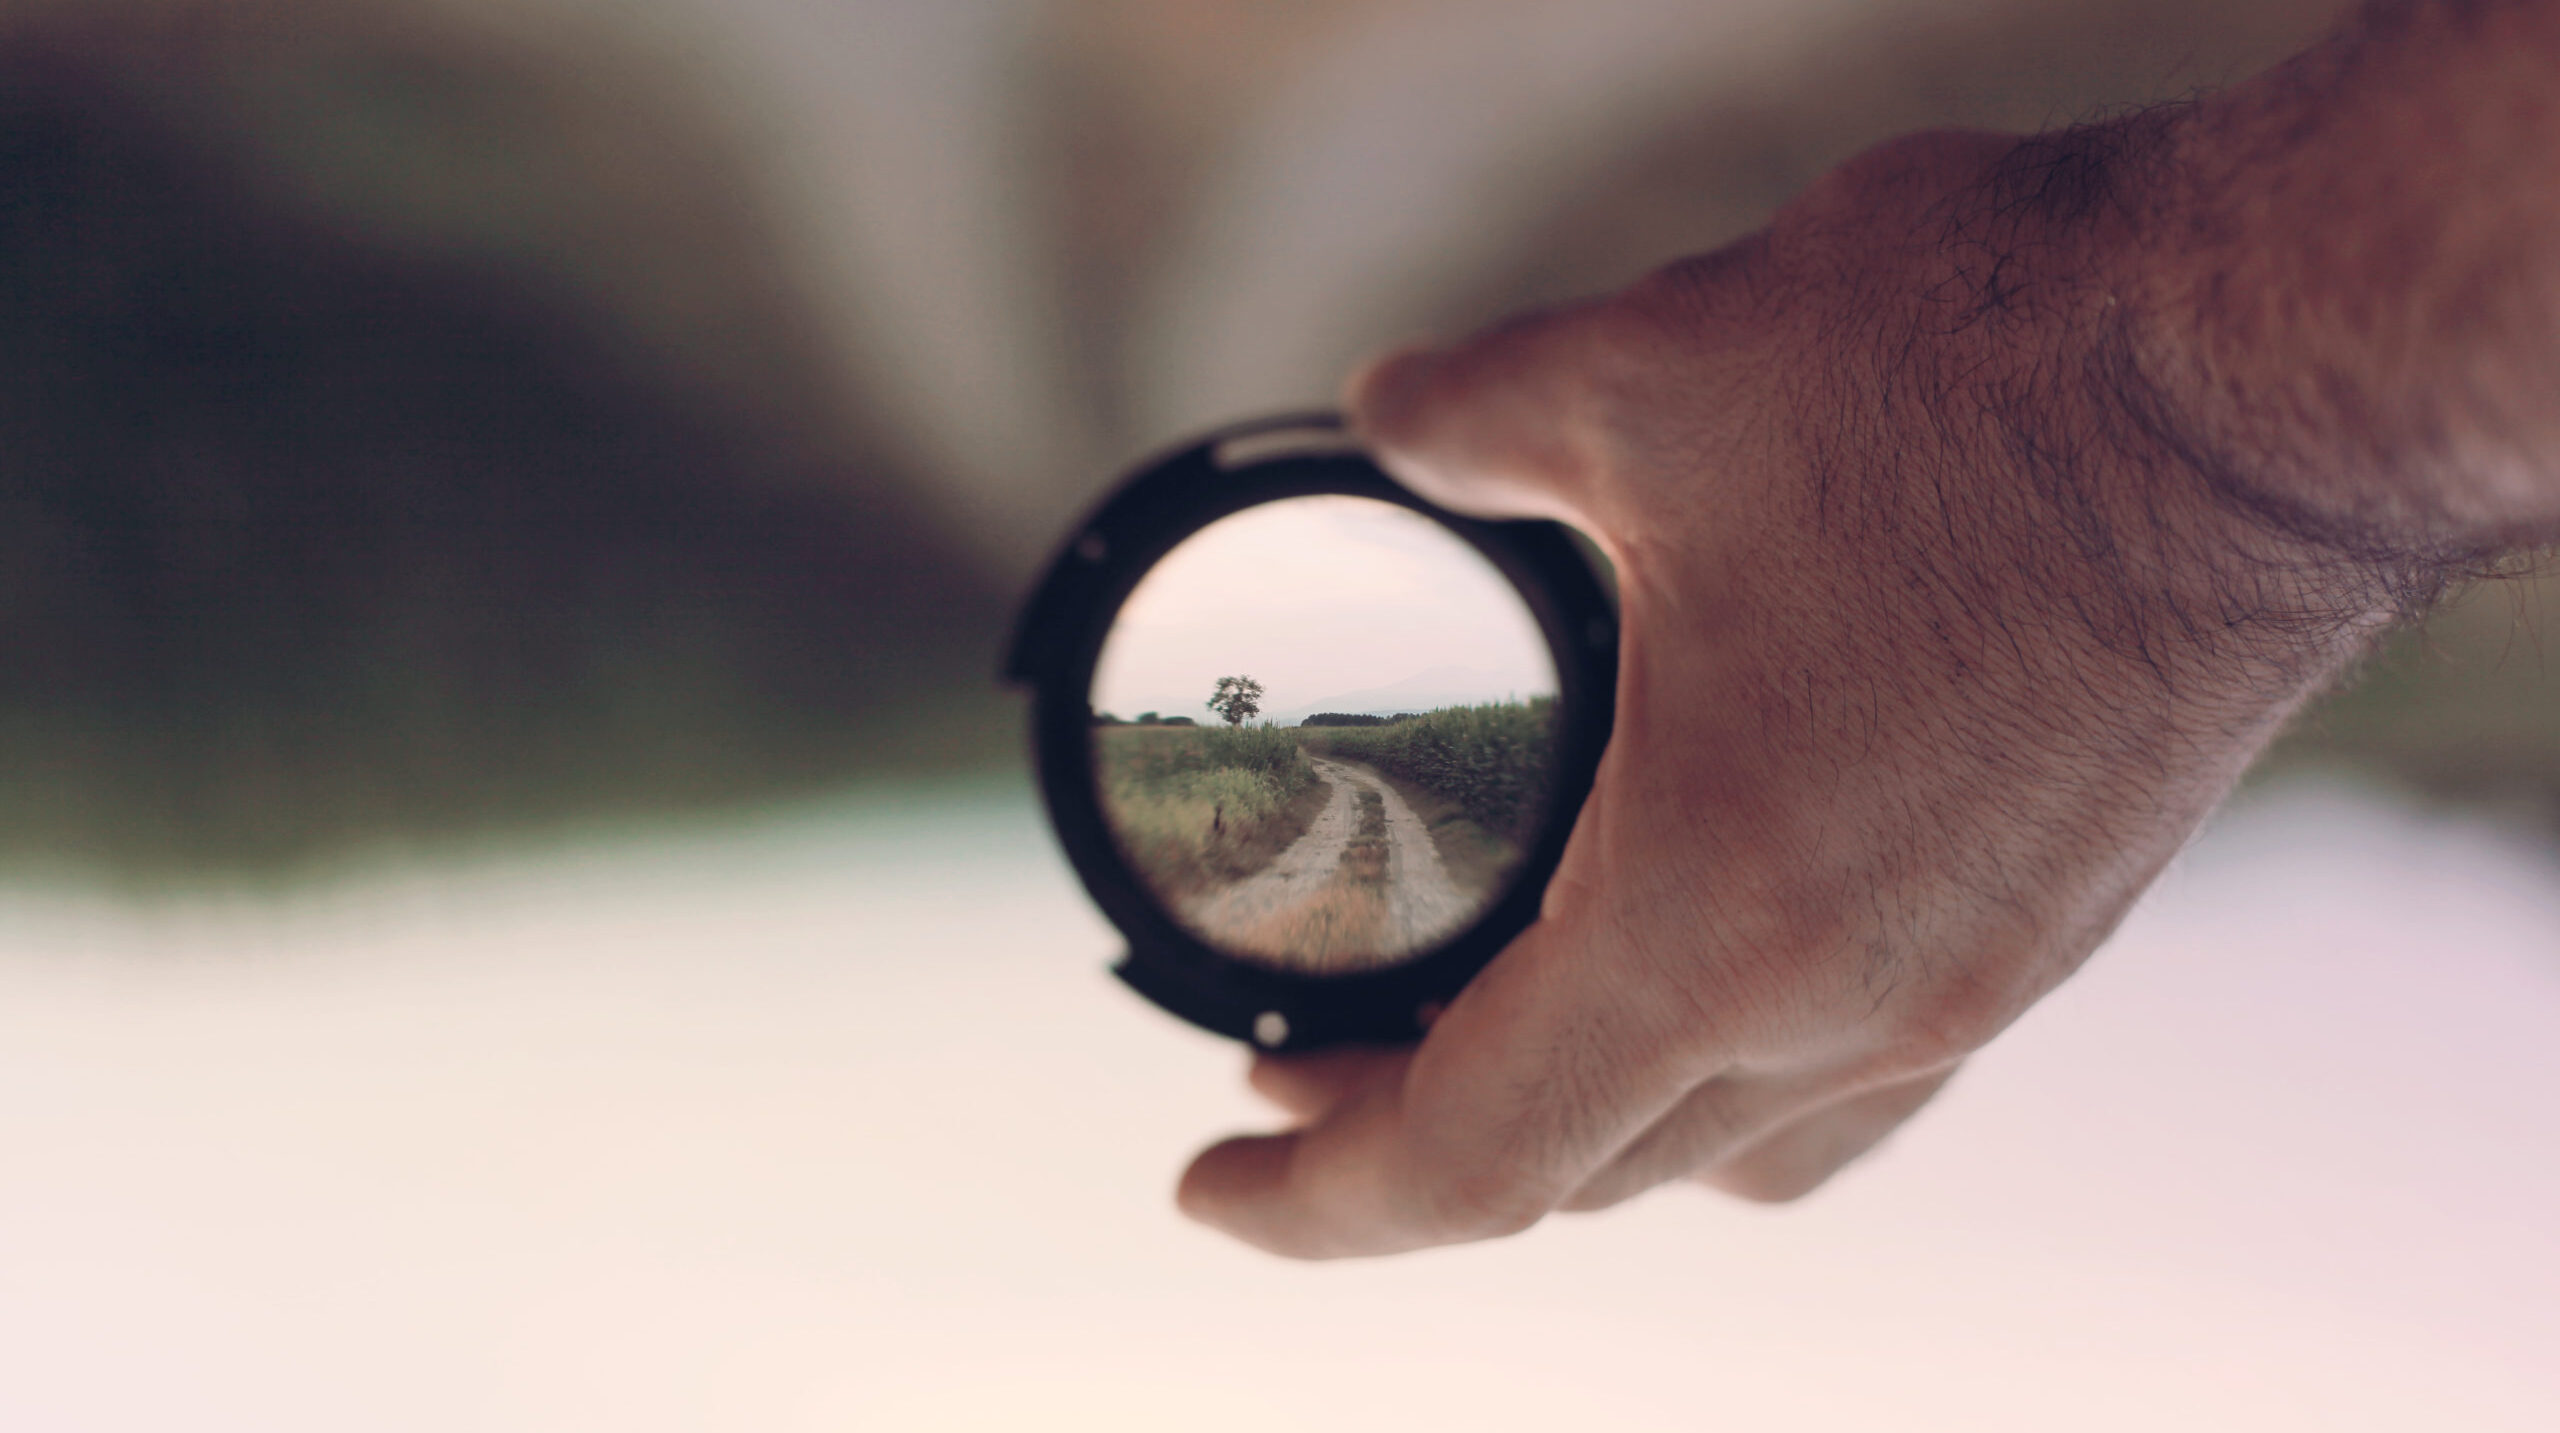 Hyperfocus: Man with ADHD holding lens with focused image of landscape inside it